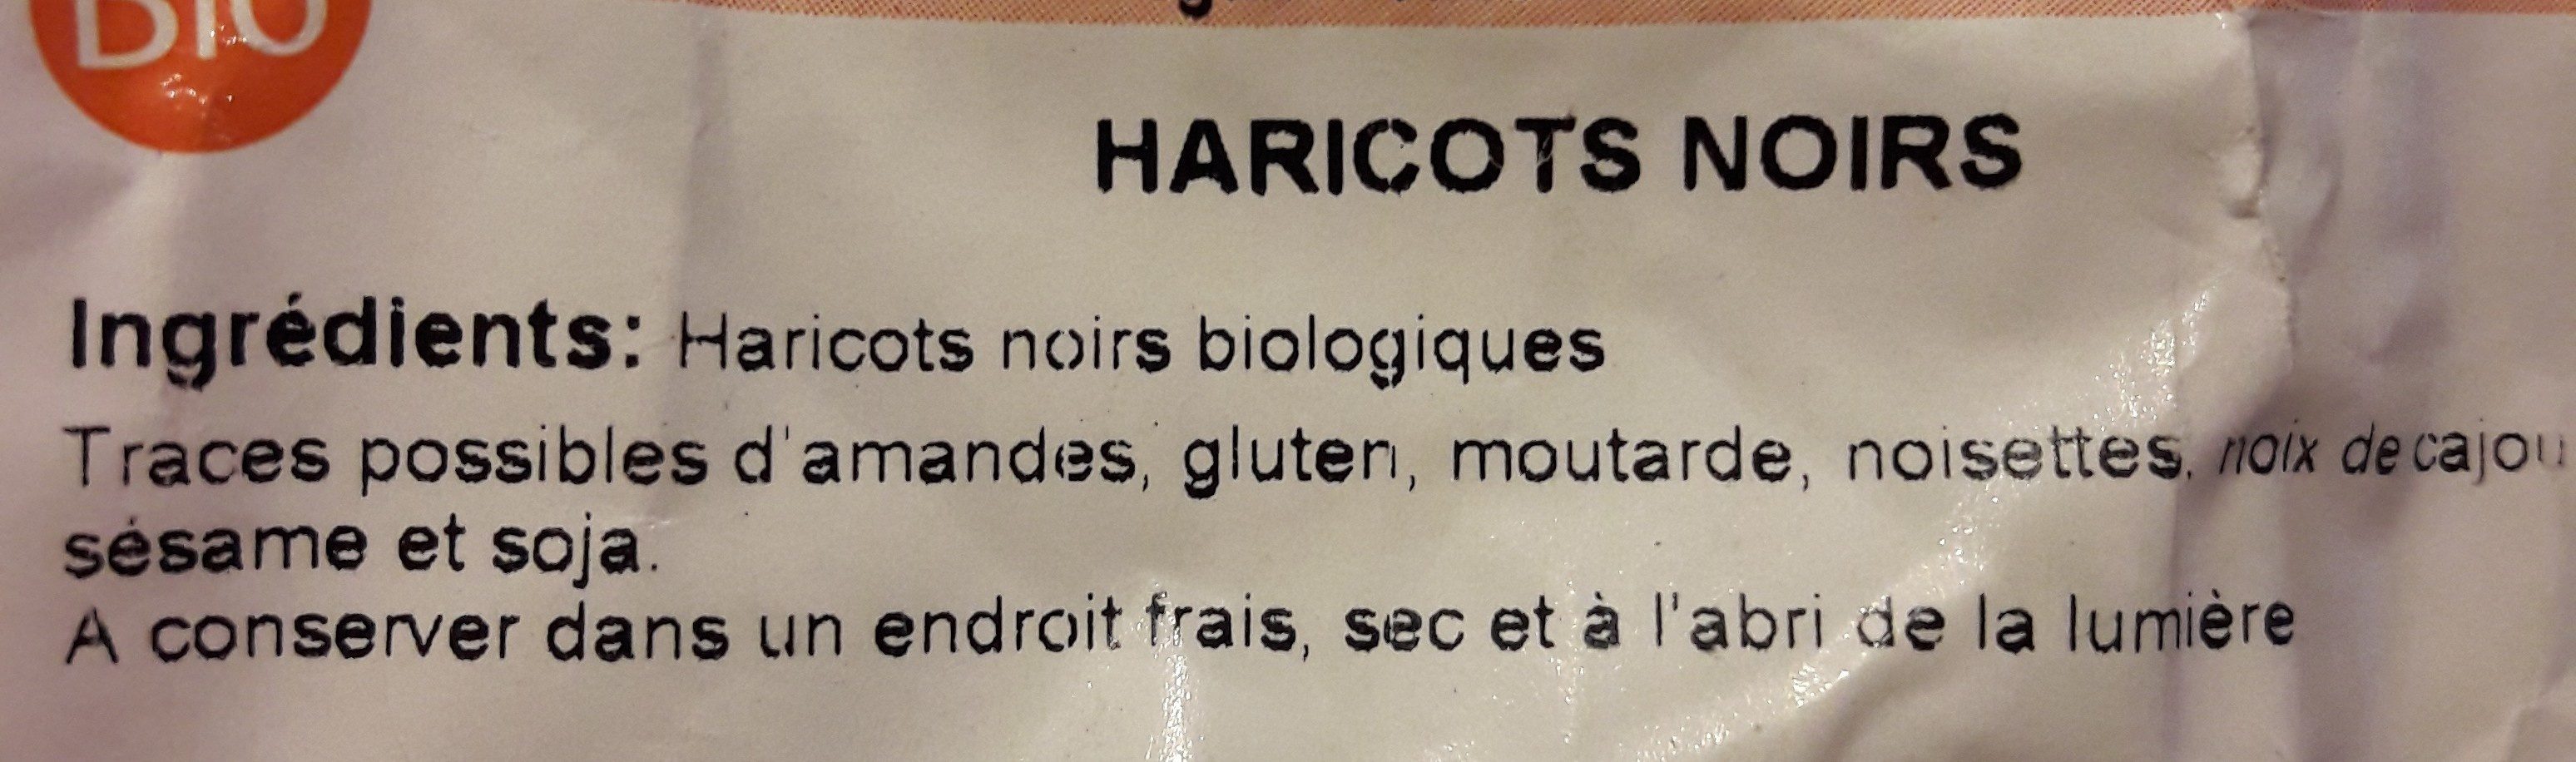 Haricots noirs - Ingredients - fr